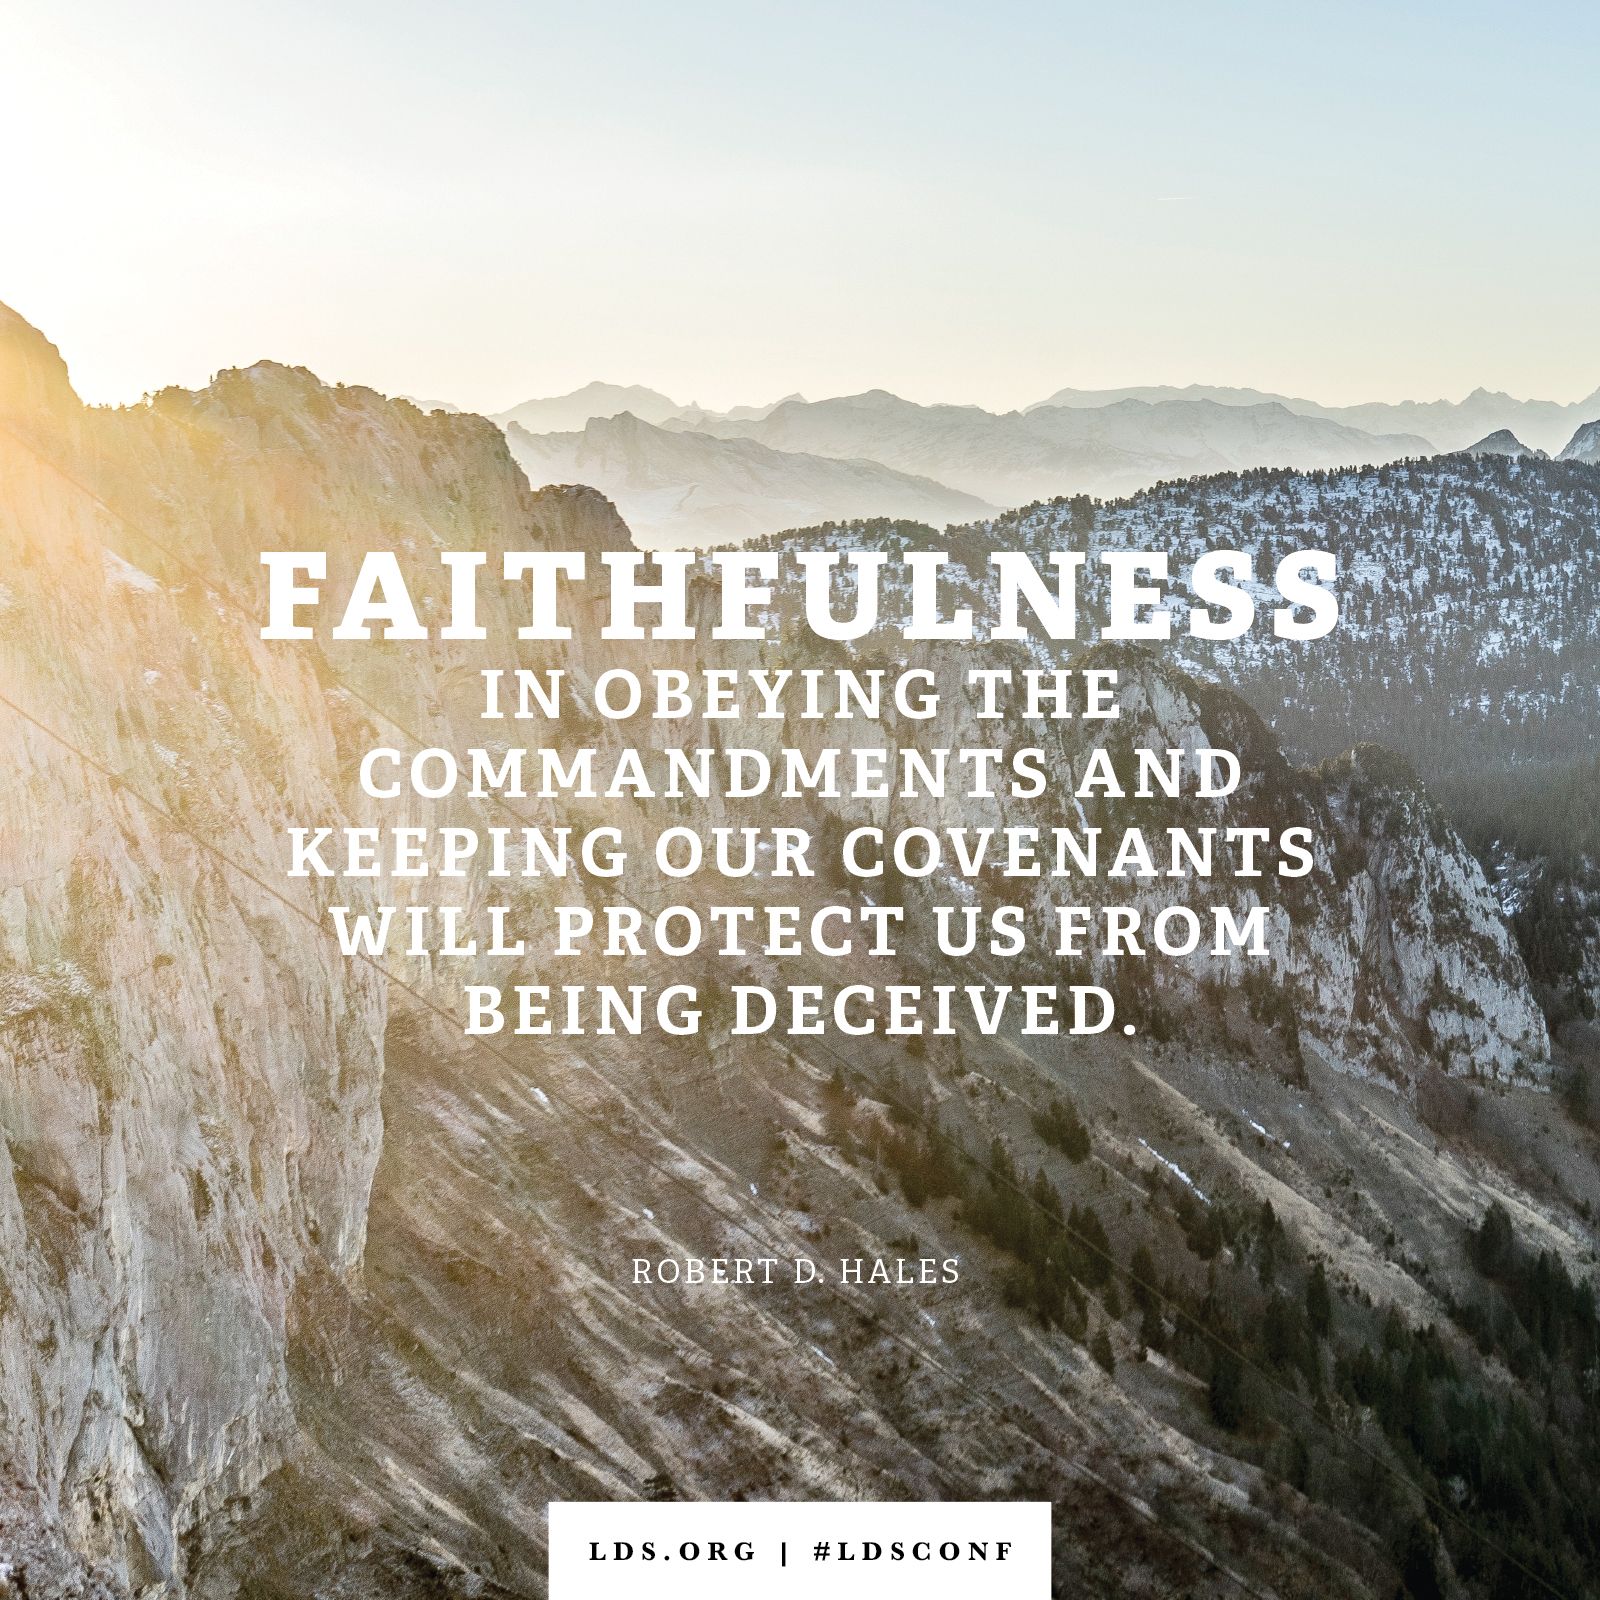 “Faithfulness in obeying the commandments and keeping our covenants will protect us from being deceived.” —Elder Robert D. Hales, “The Holy Ghost”